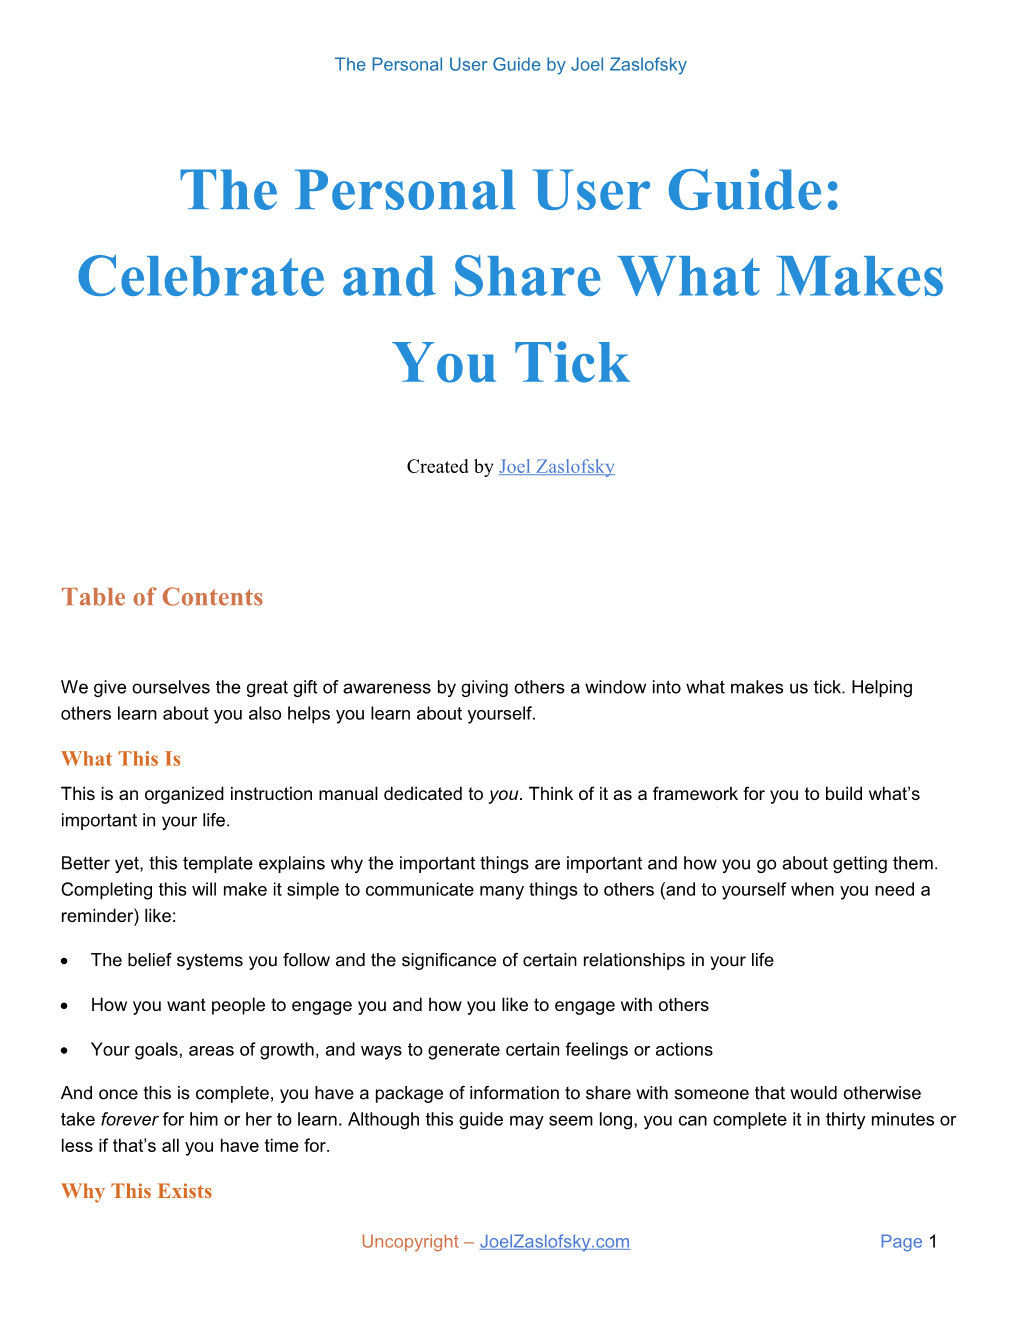 The Personal User Guide: Celebrate and Share What Makes You Tick